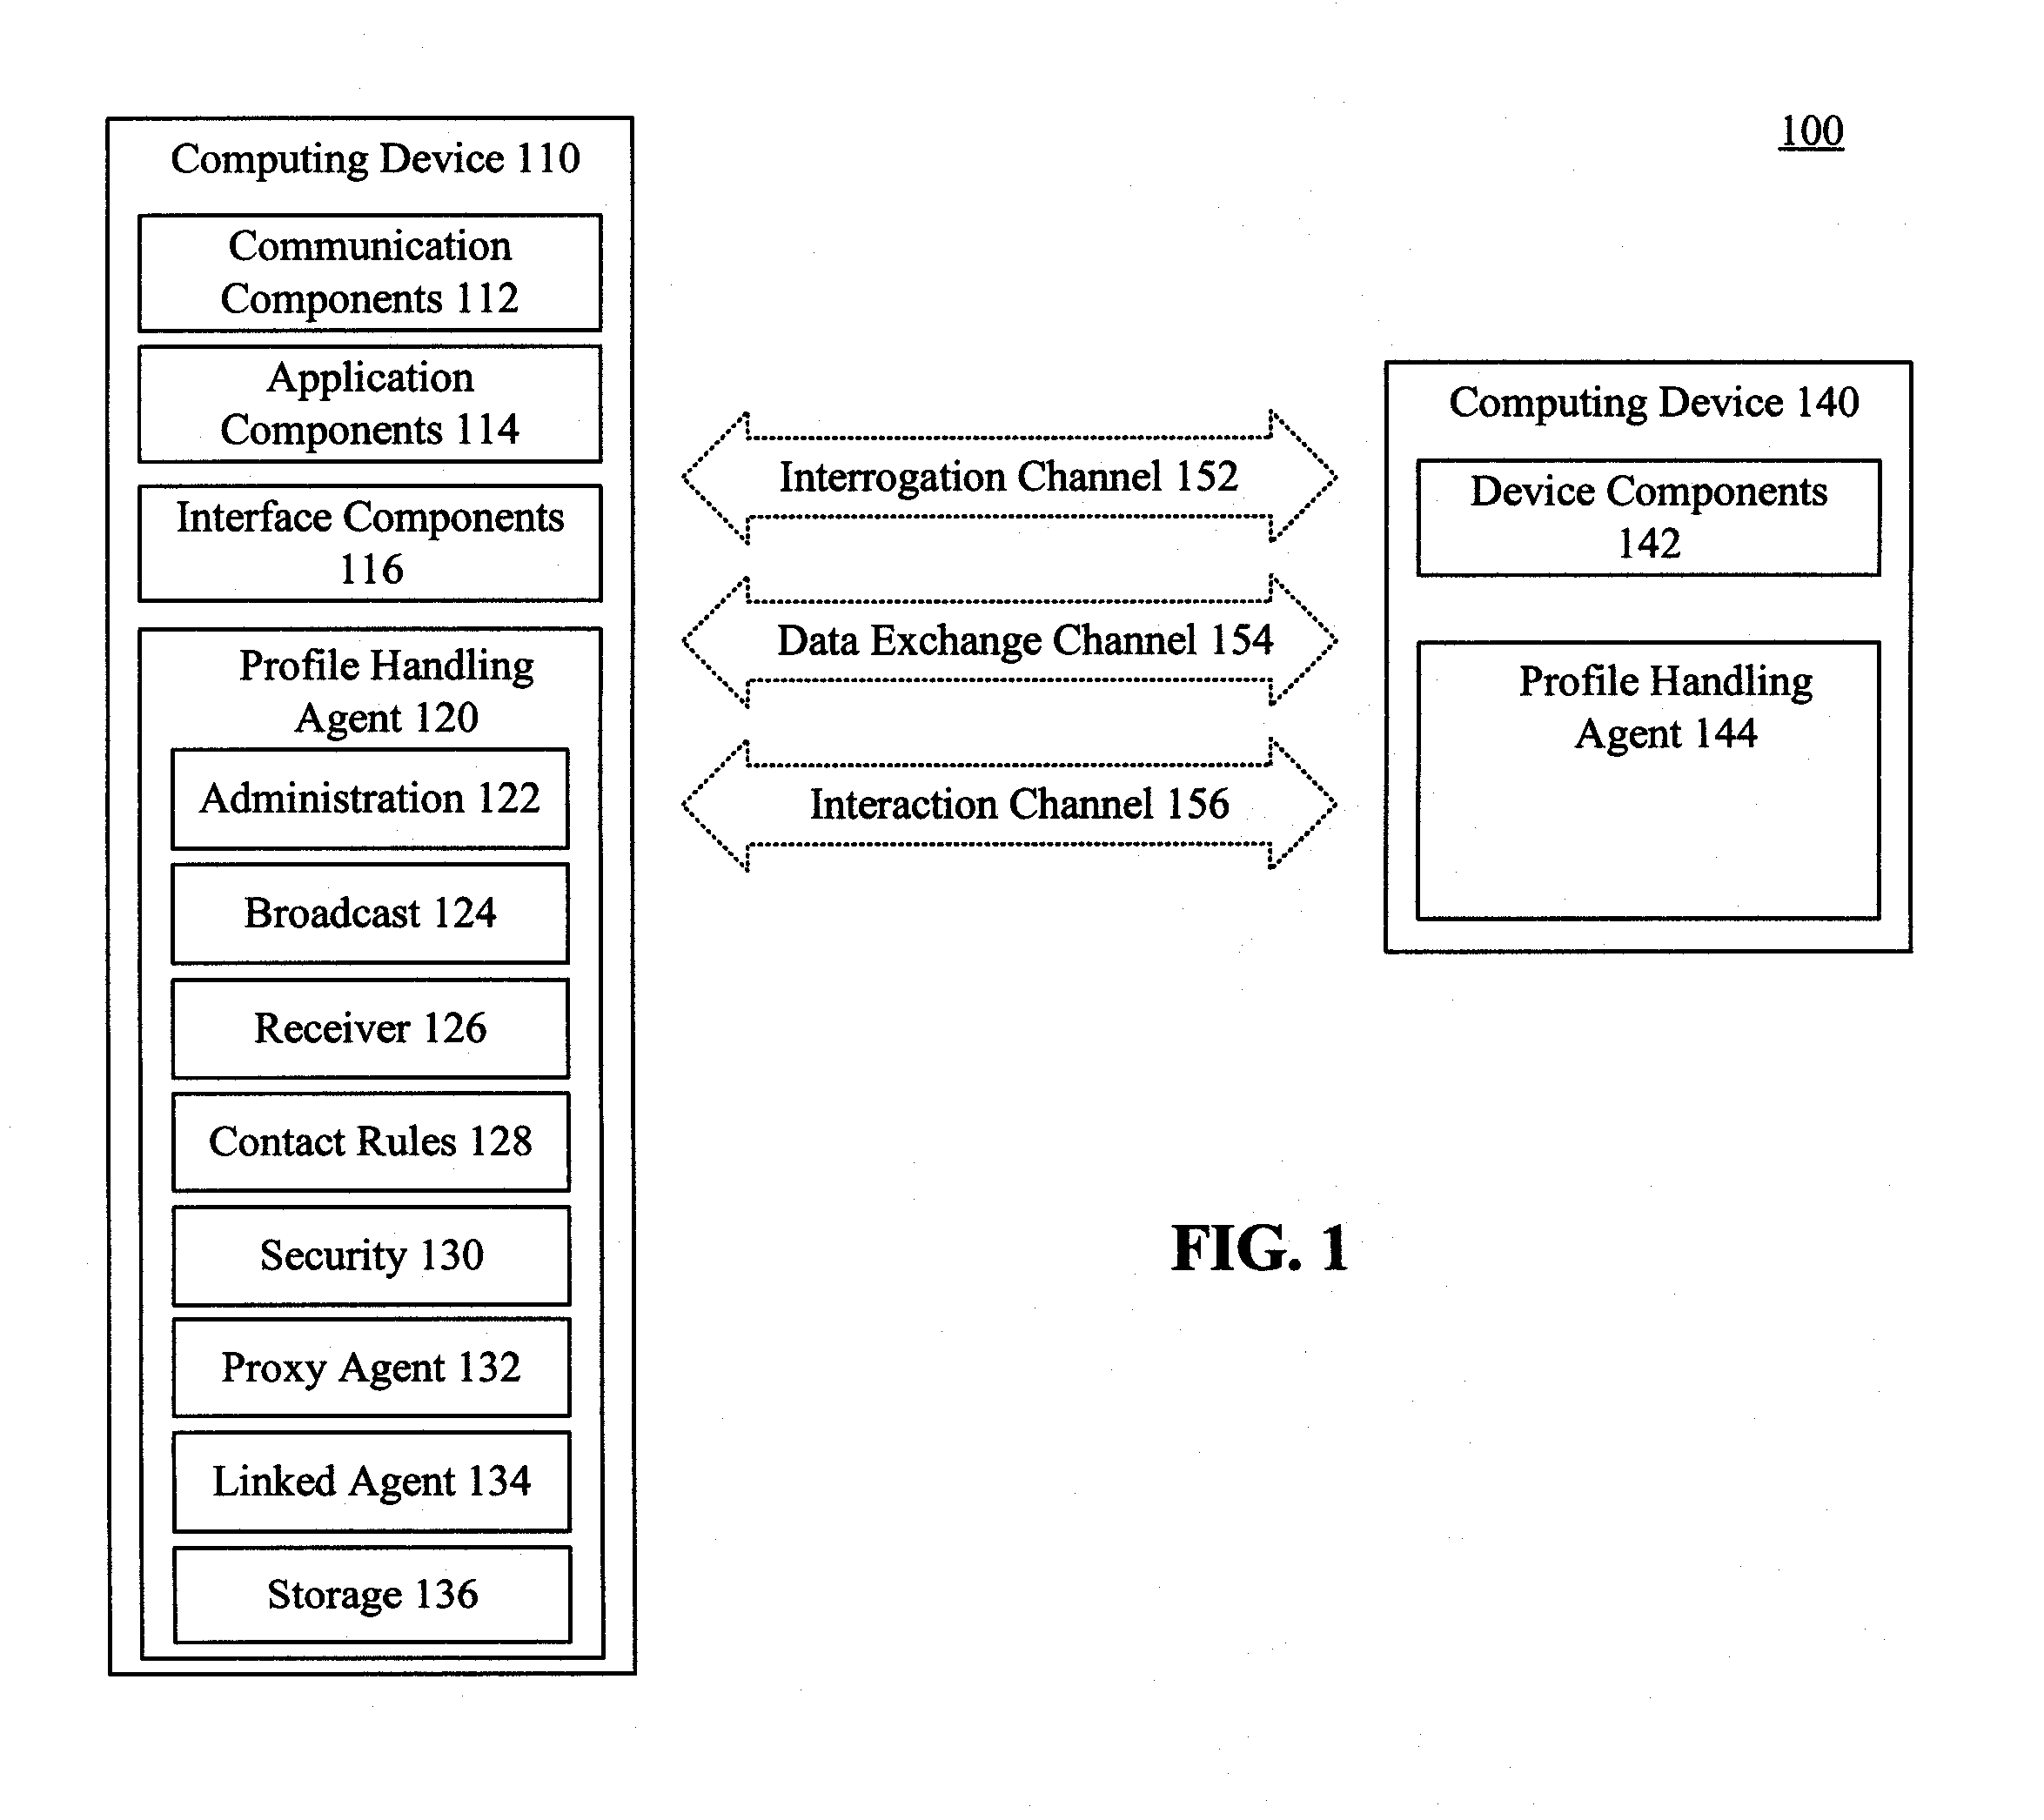 Contact initialization based upon automatic profile sharing between computing devices